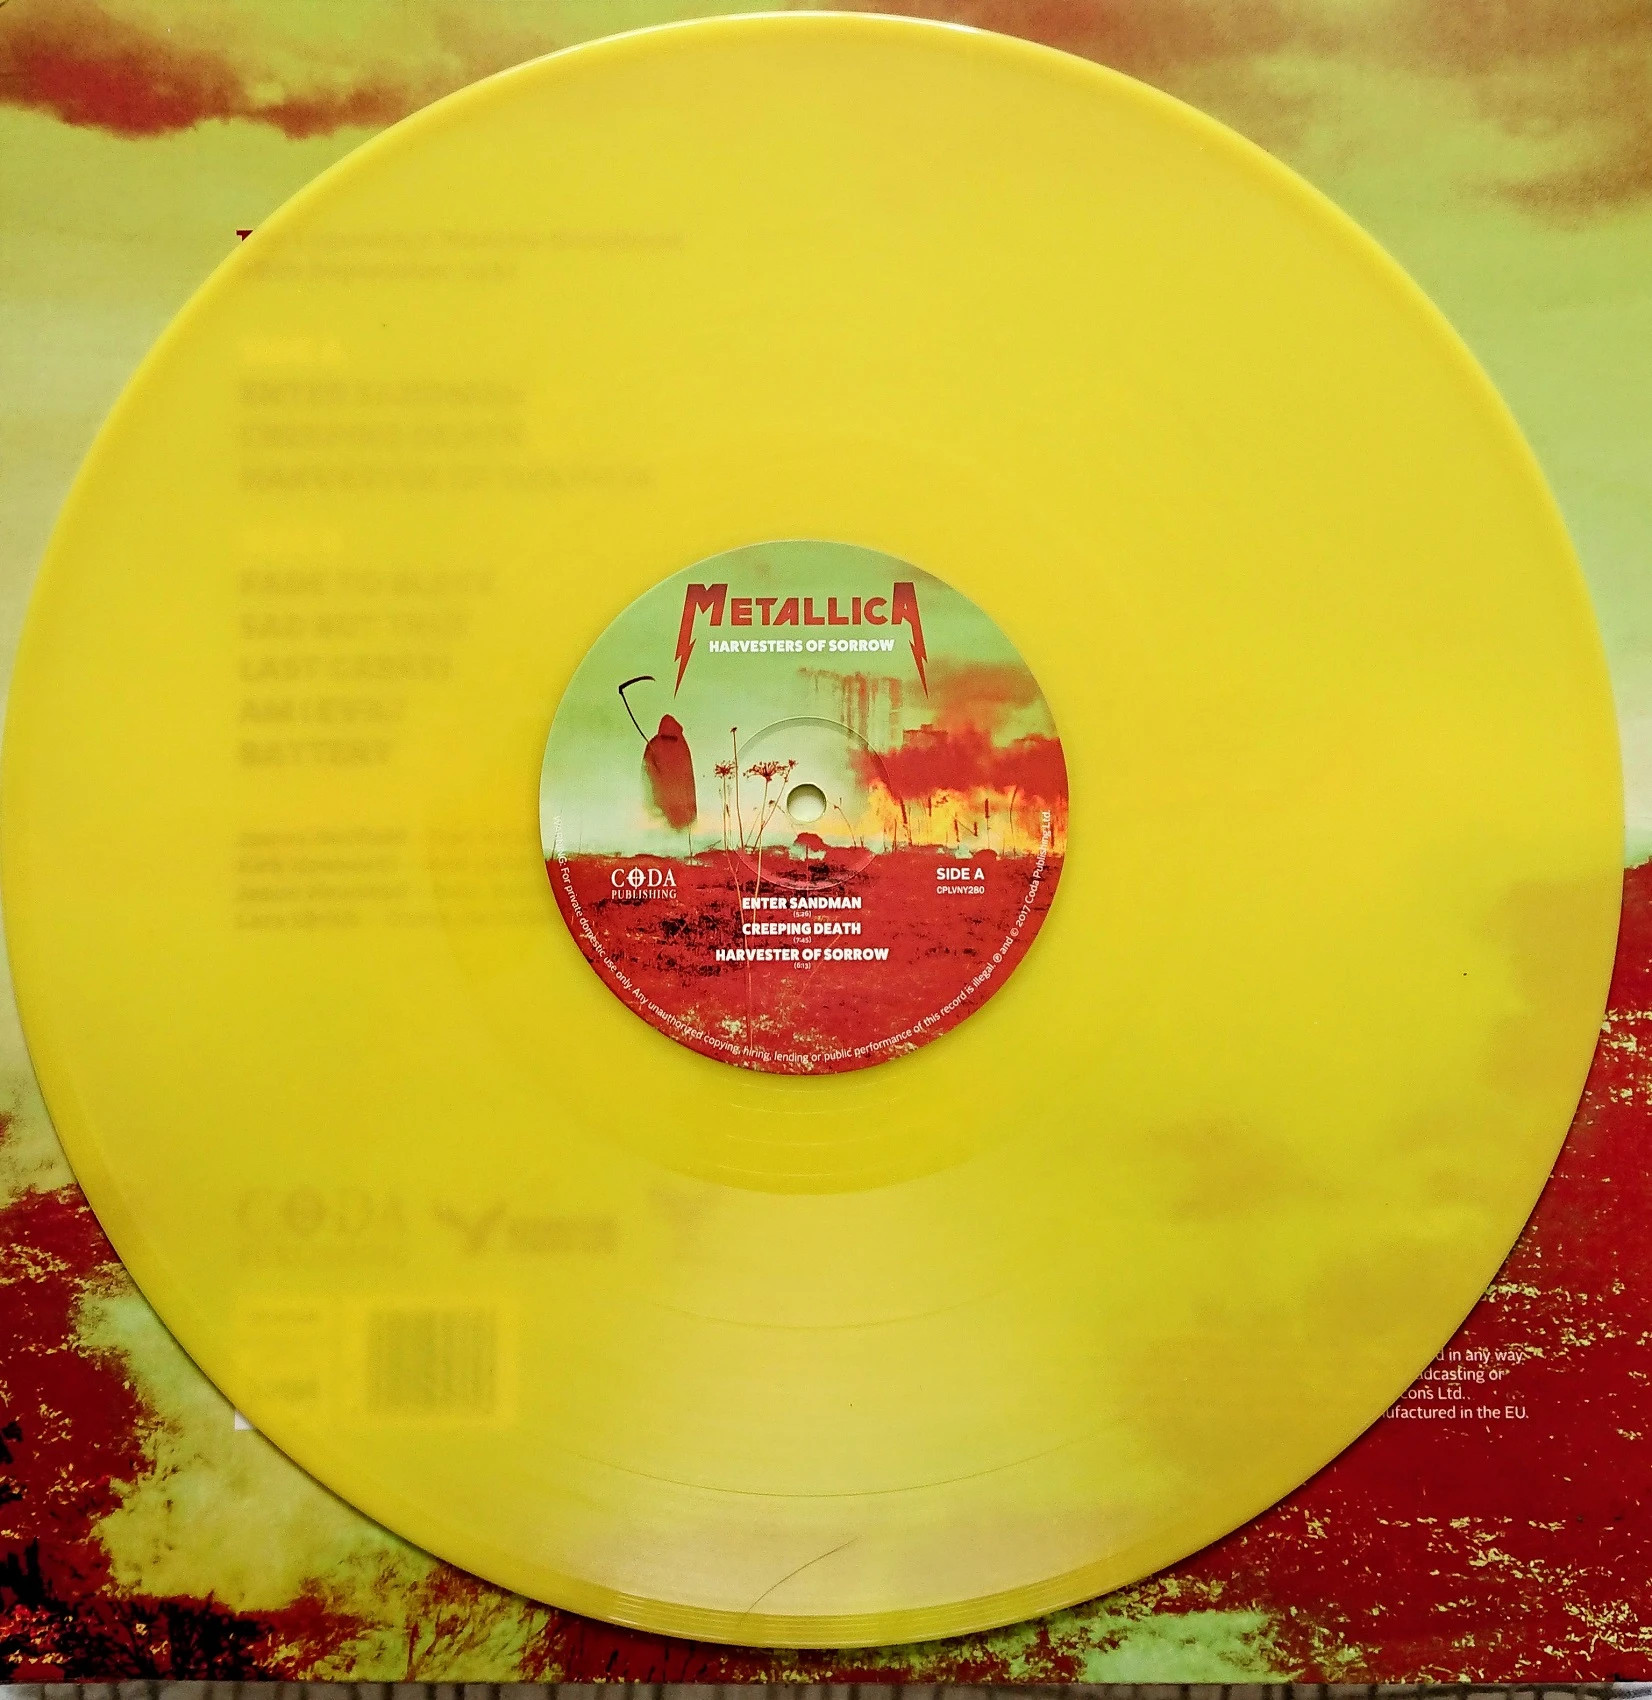 Metallica - Harvesters of Sorrow - Yellow Vinyle LP Limited Edition